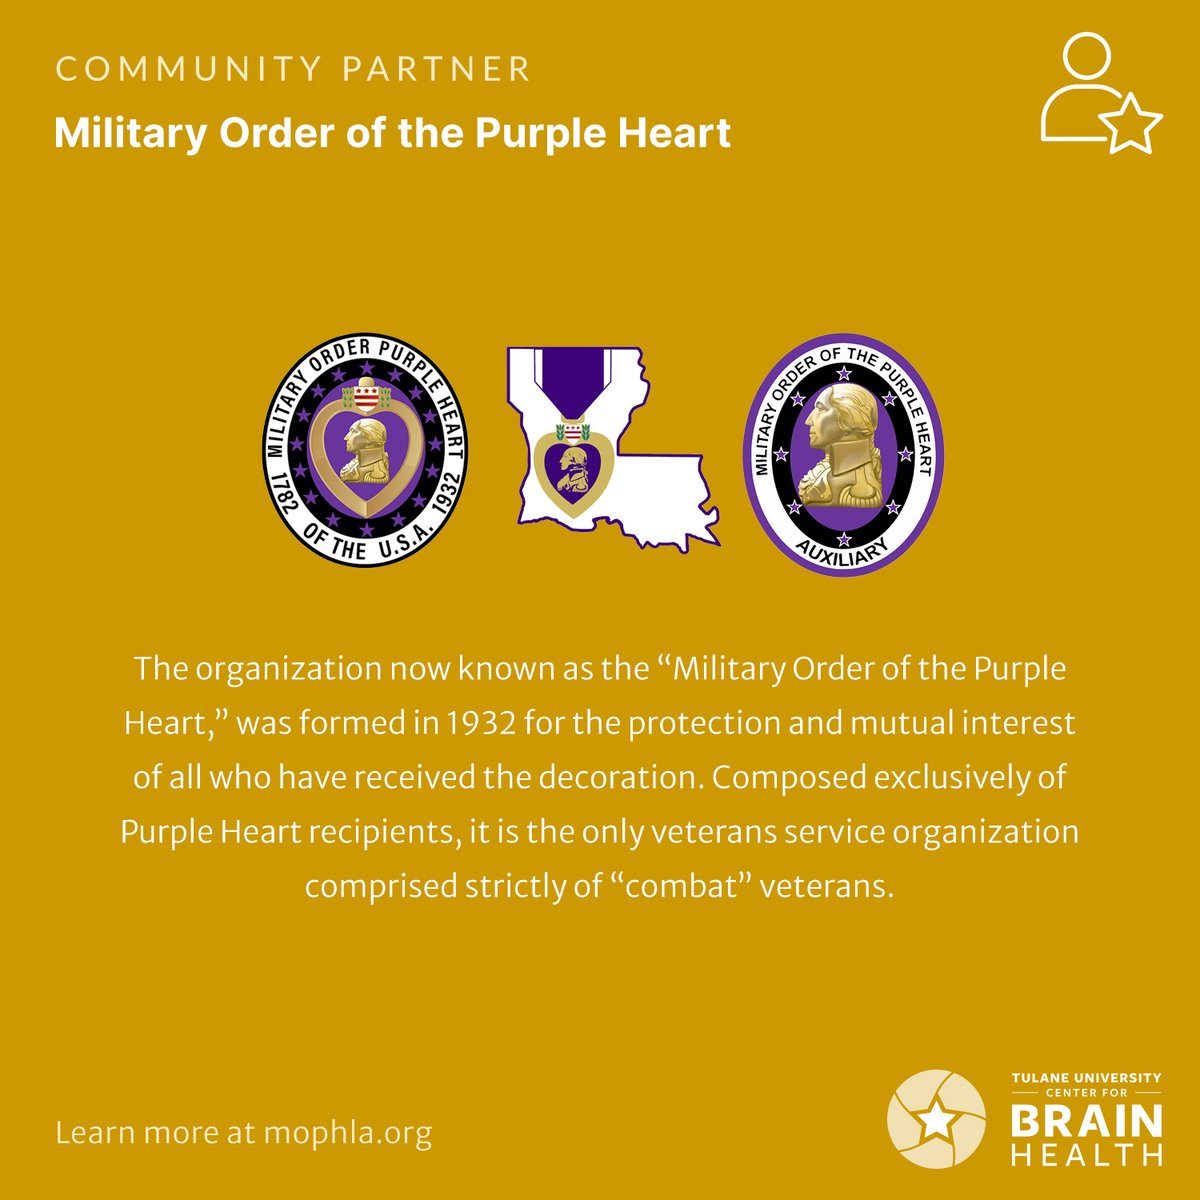 #NationalPurpleHeartDay is a time for Americans to remember and honor the brave men and women who were wounded or lost their lives on the battlefield.

Today we also recognize our community partner, @moph_hq, and the impactful work they do to improve the lives of Veterans.